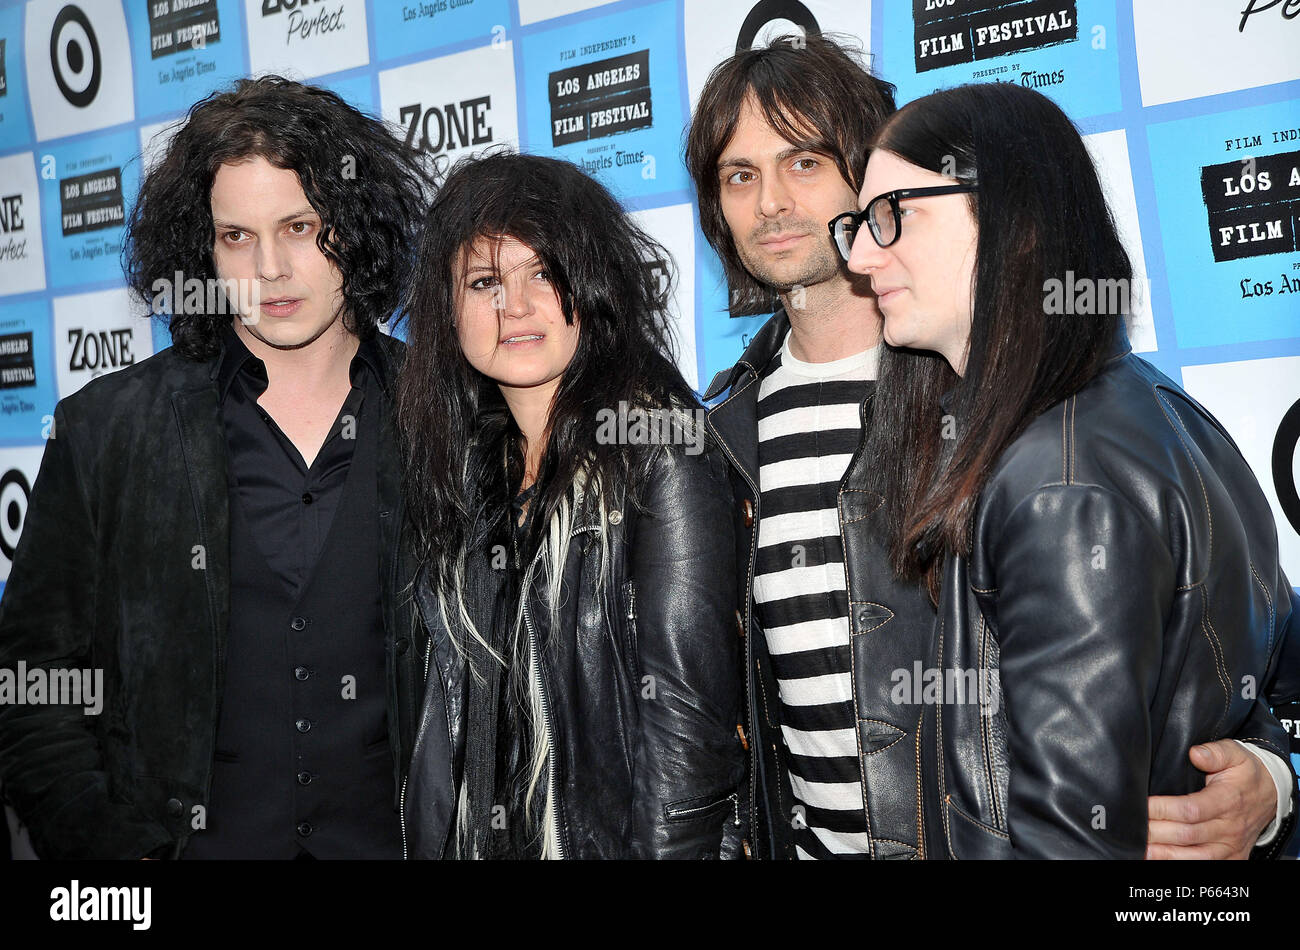 Jack White, Alison Mosshart ( of The Kills ), Dean Fertita ( of the Queens of Stone Age ), Jack lawrence ( of the Raconteurs )- It May Get loud Premiere at the LA Film Festival at the Man Festival Theatre In Los Angeles.          -            TheDeadWeather 19.jpgTheDeadWeather 19  Event in Hollywood Life - California, Red Carpet Event, USA, Film Industry, Celebrities, Photography, Bestof, Arts Culture and Entertainment, Topix Celebrities fashion, Best of, Hollywood Life, Event in Hollywood Life - California, Red Carpet and backstage, ,Arts Culture and Entertainment, Photography,    inquiry ts Stock Photo